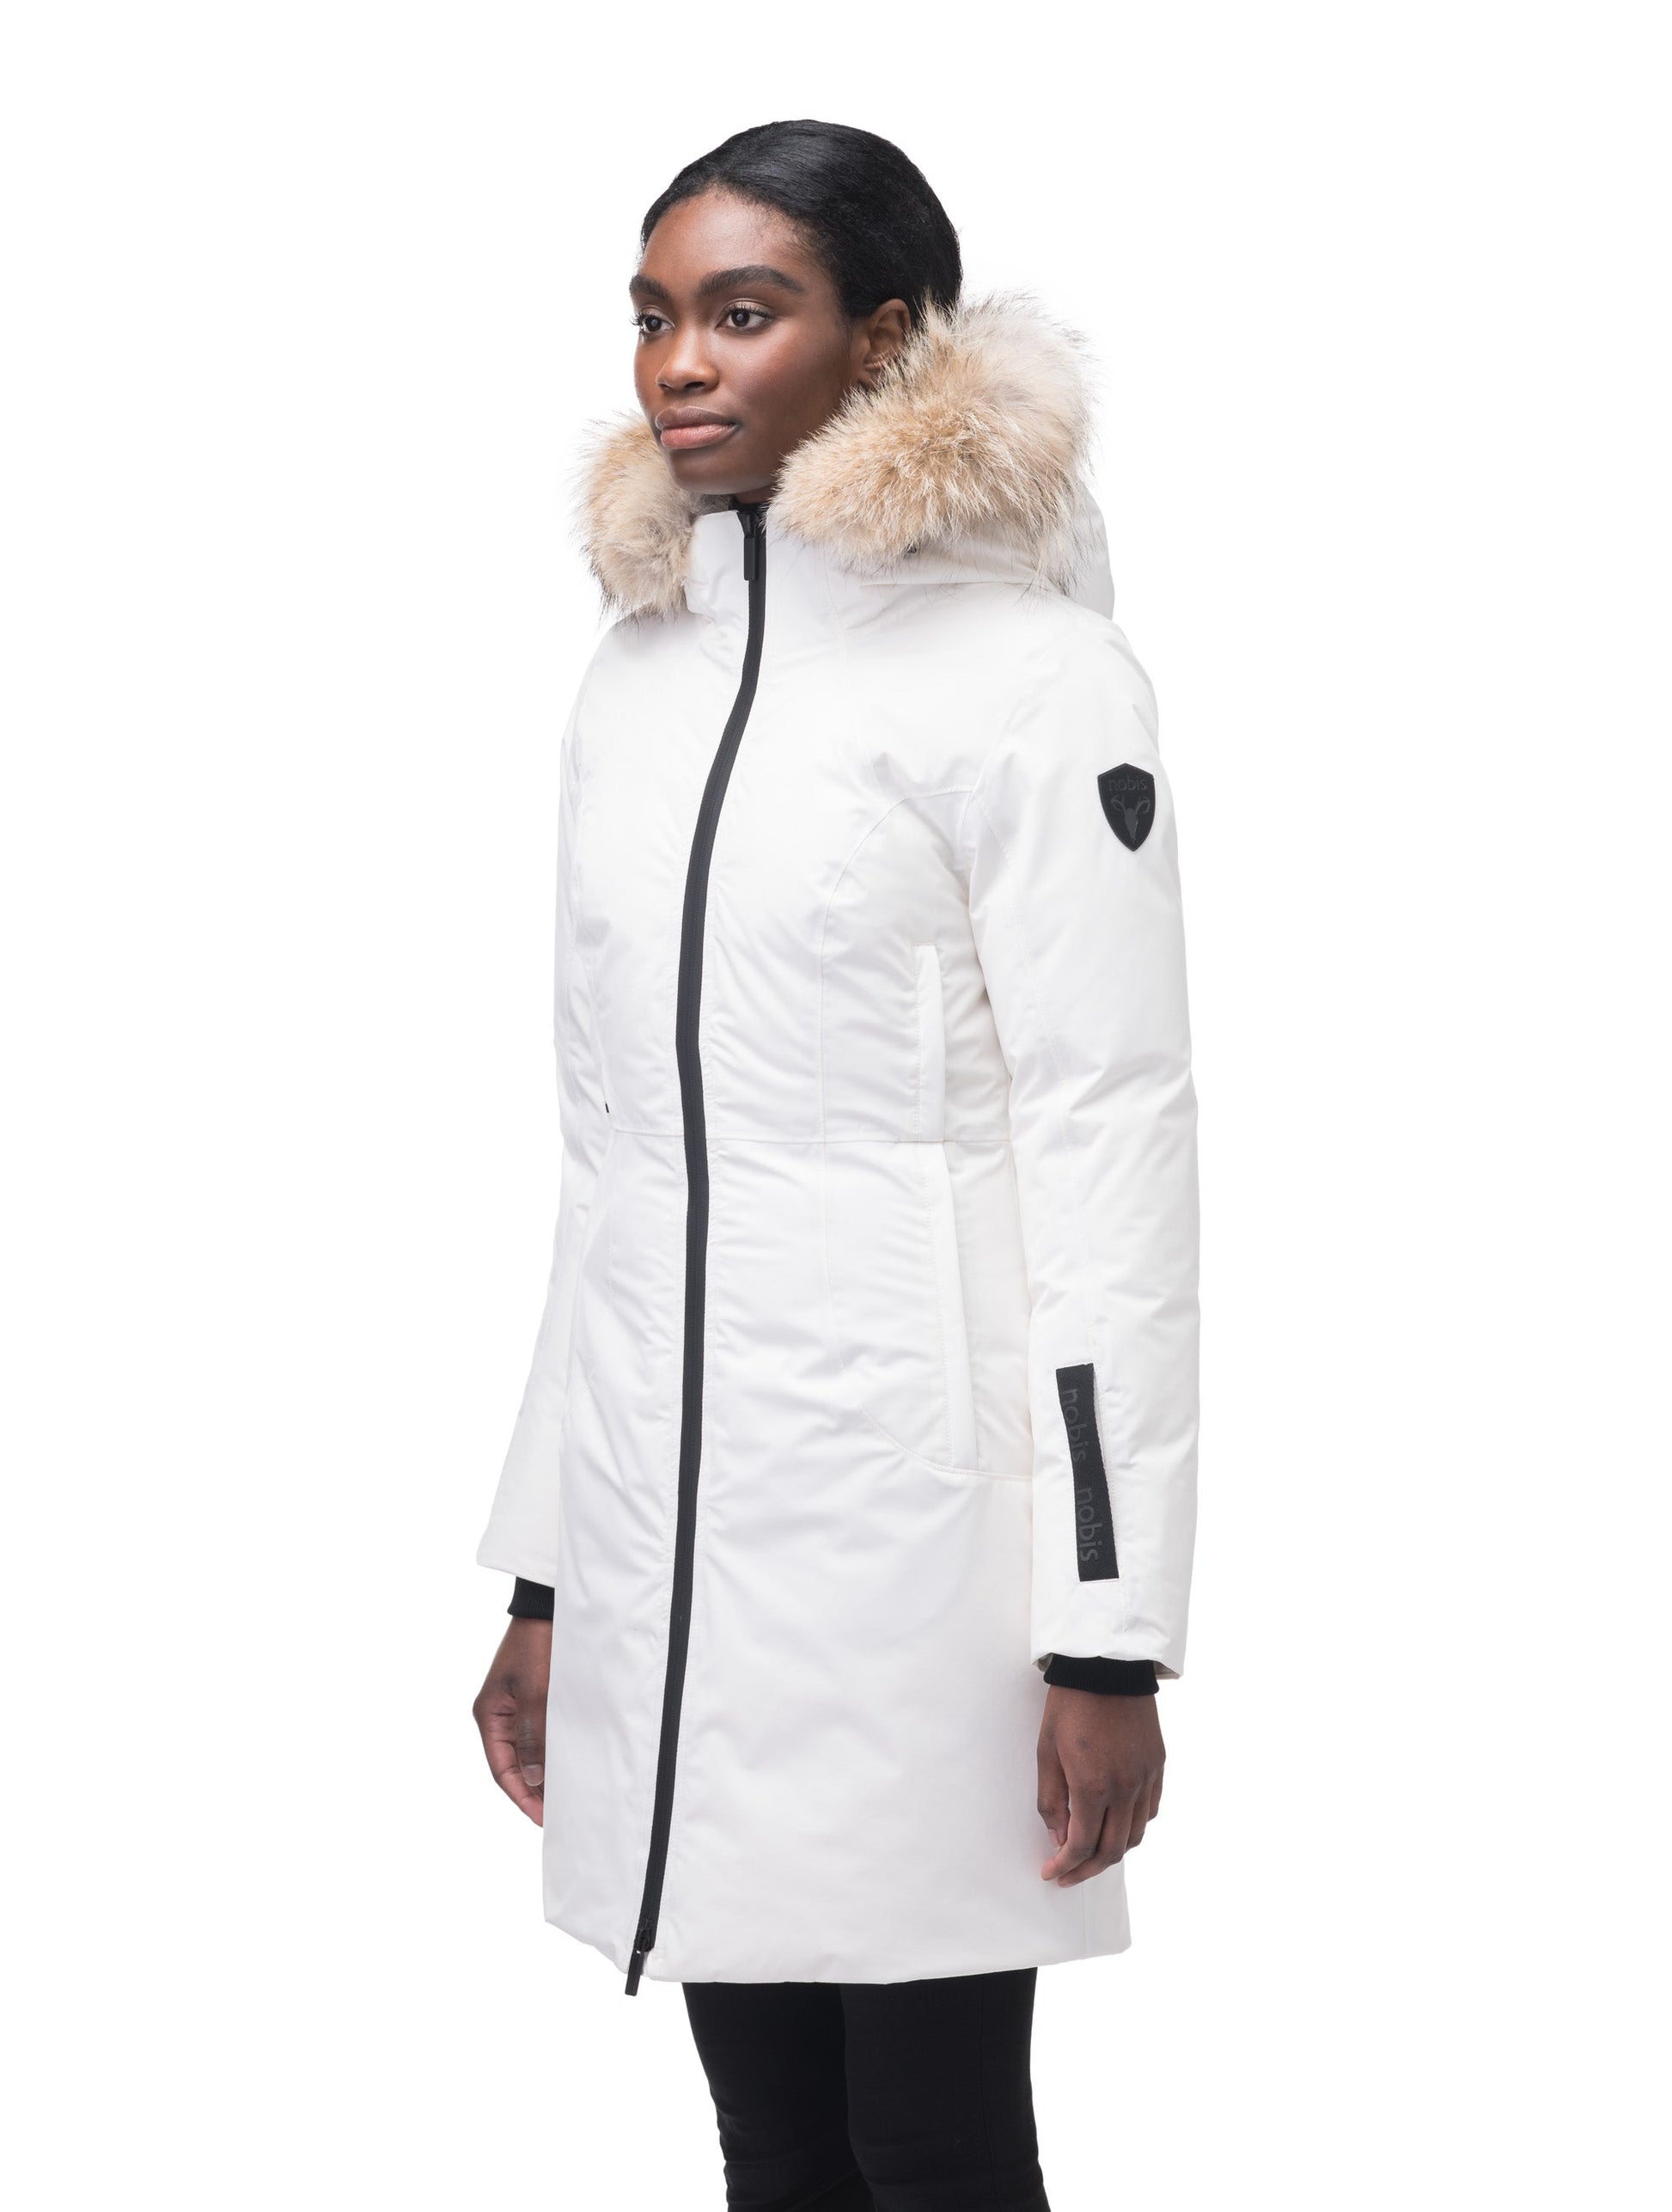 Ladies thigh length down-filled parka with non-removable hood and removable coyote fur trim in Chalk